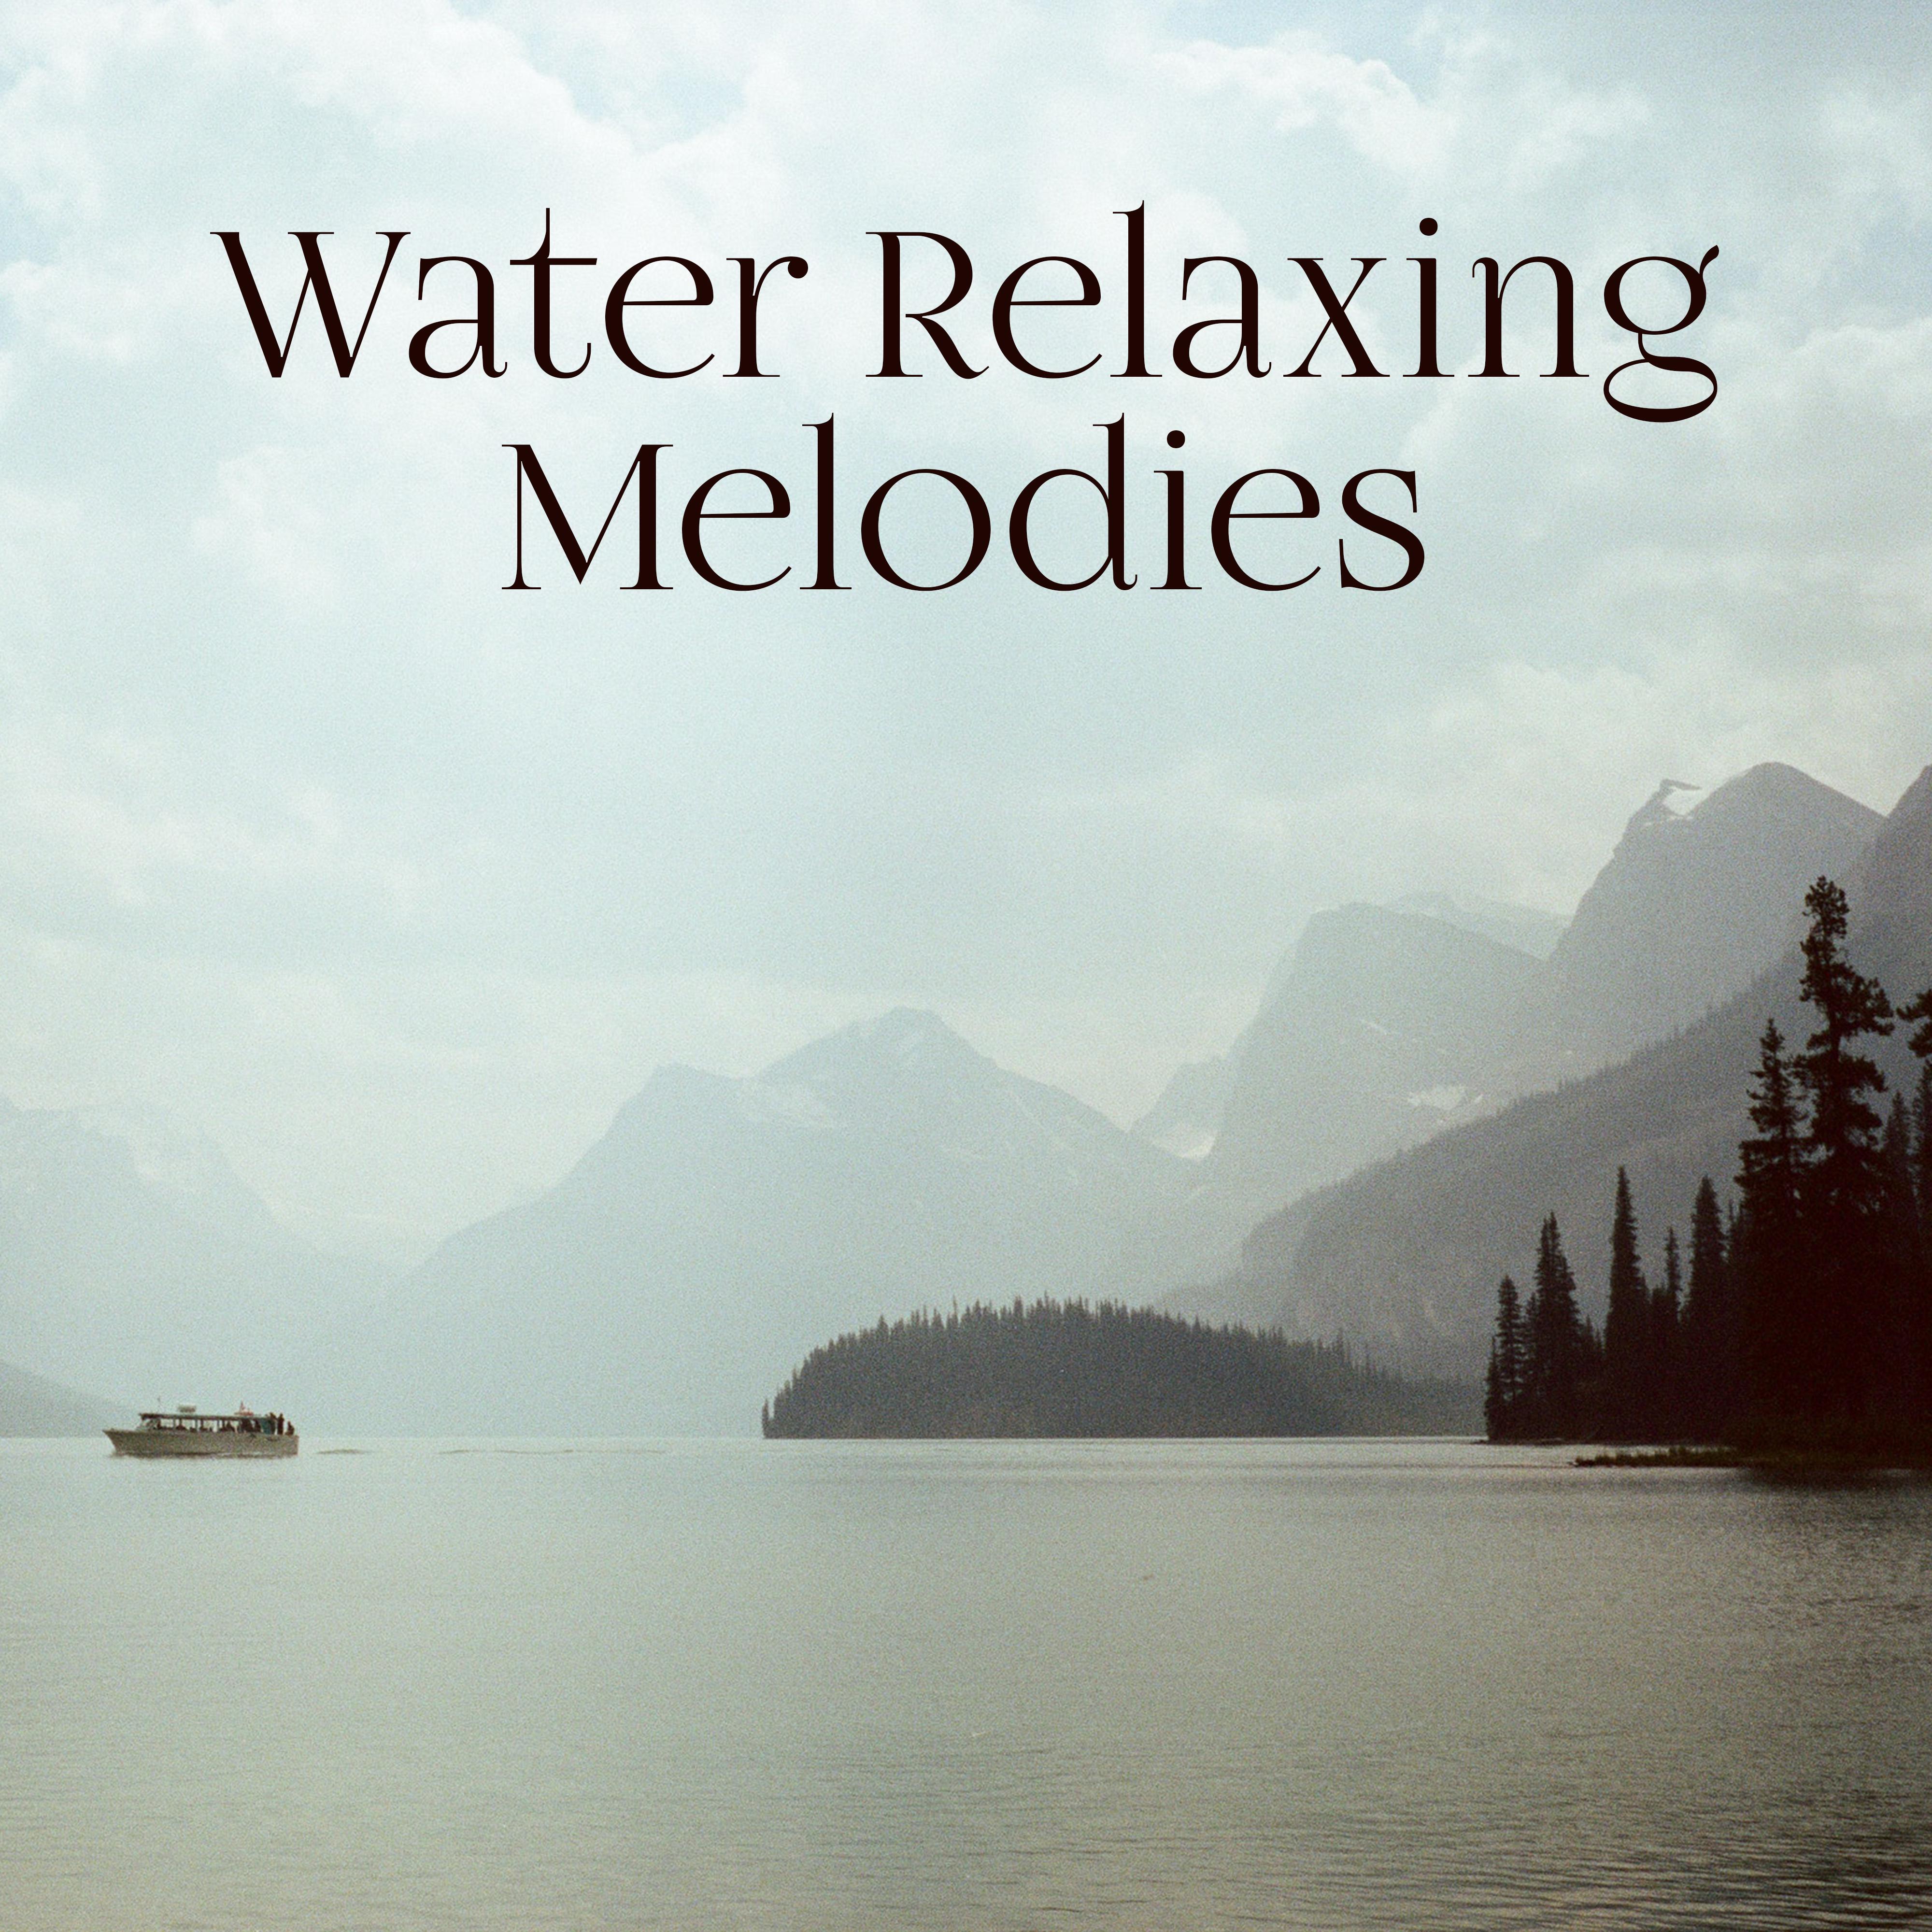 Water Relaxing Melodies